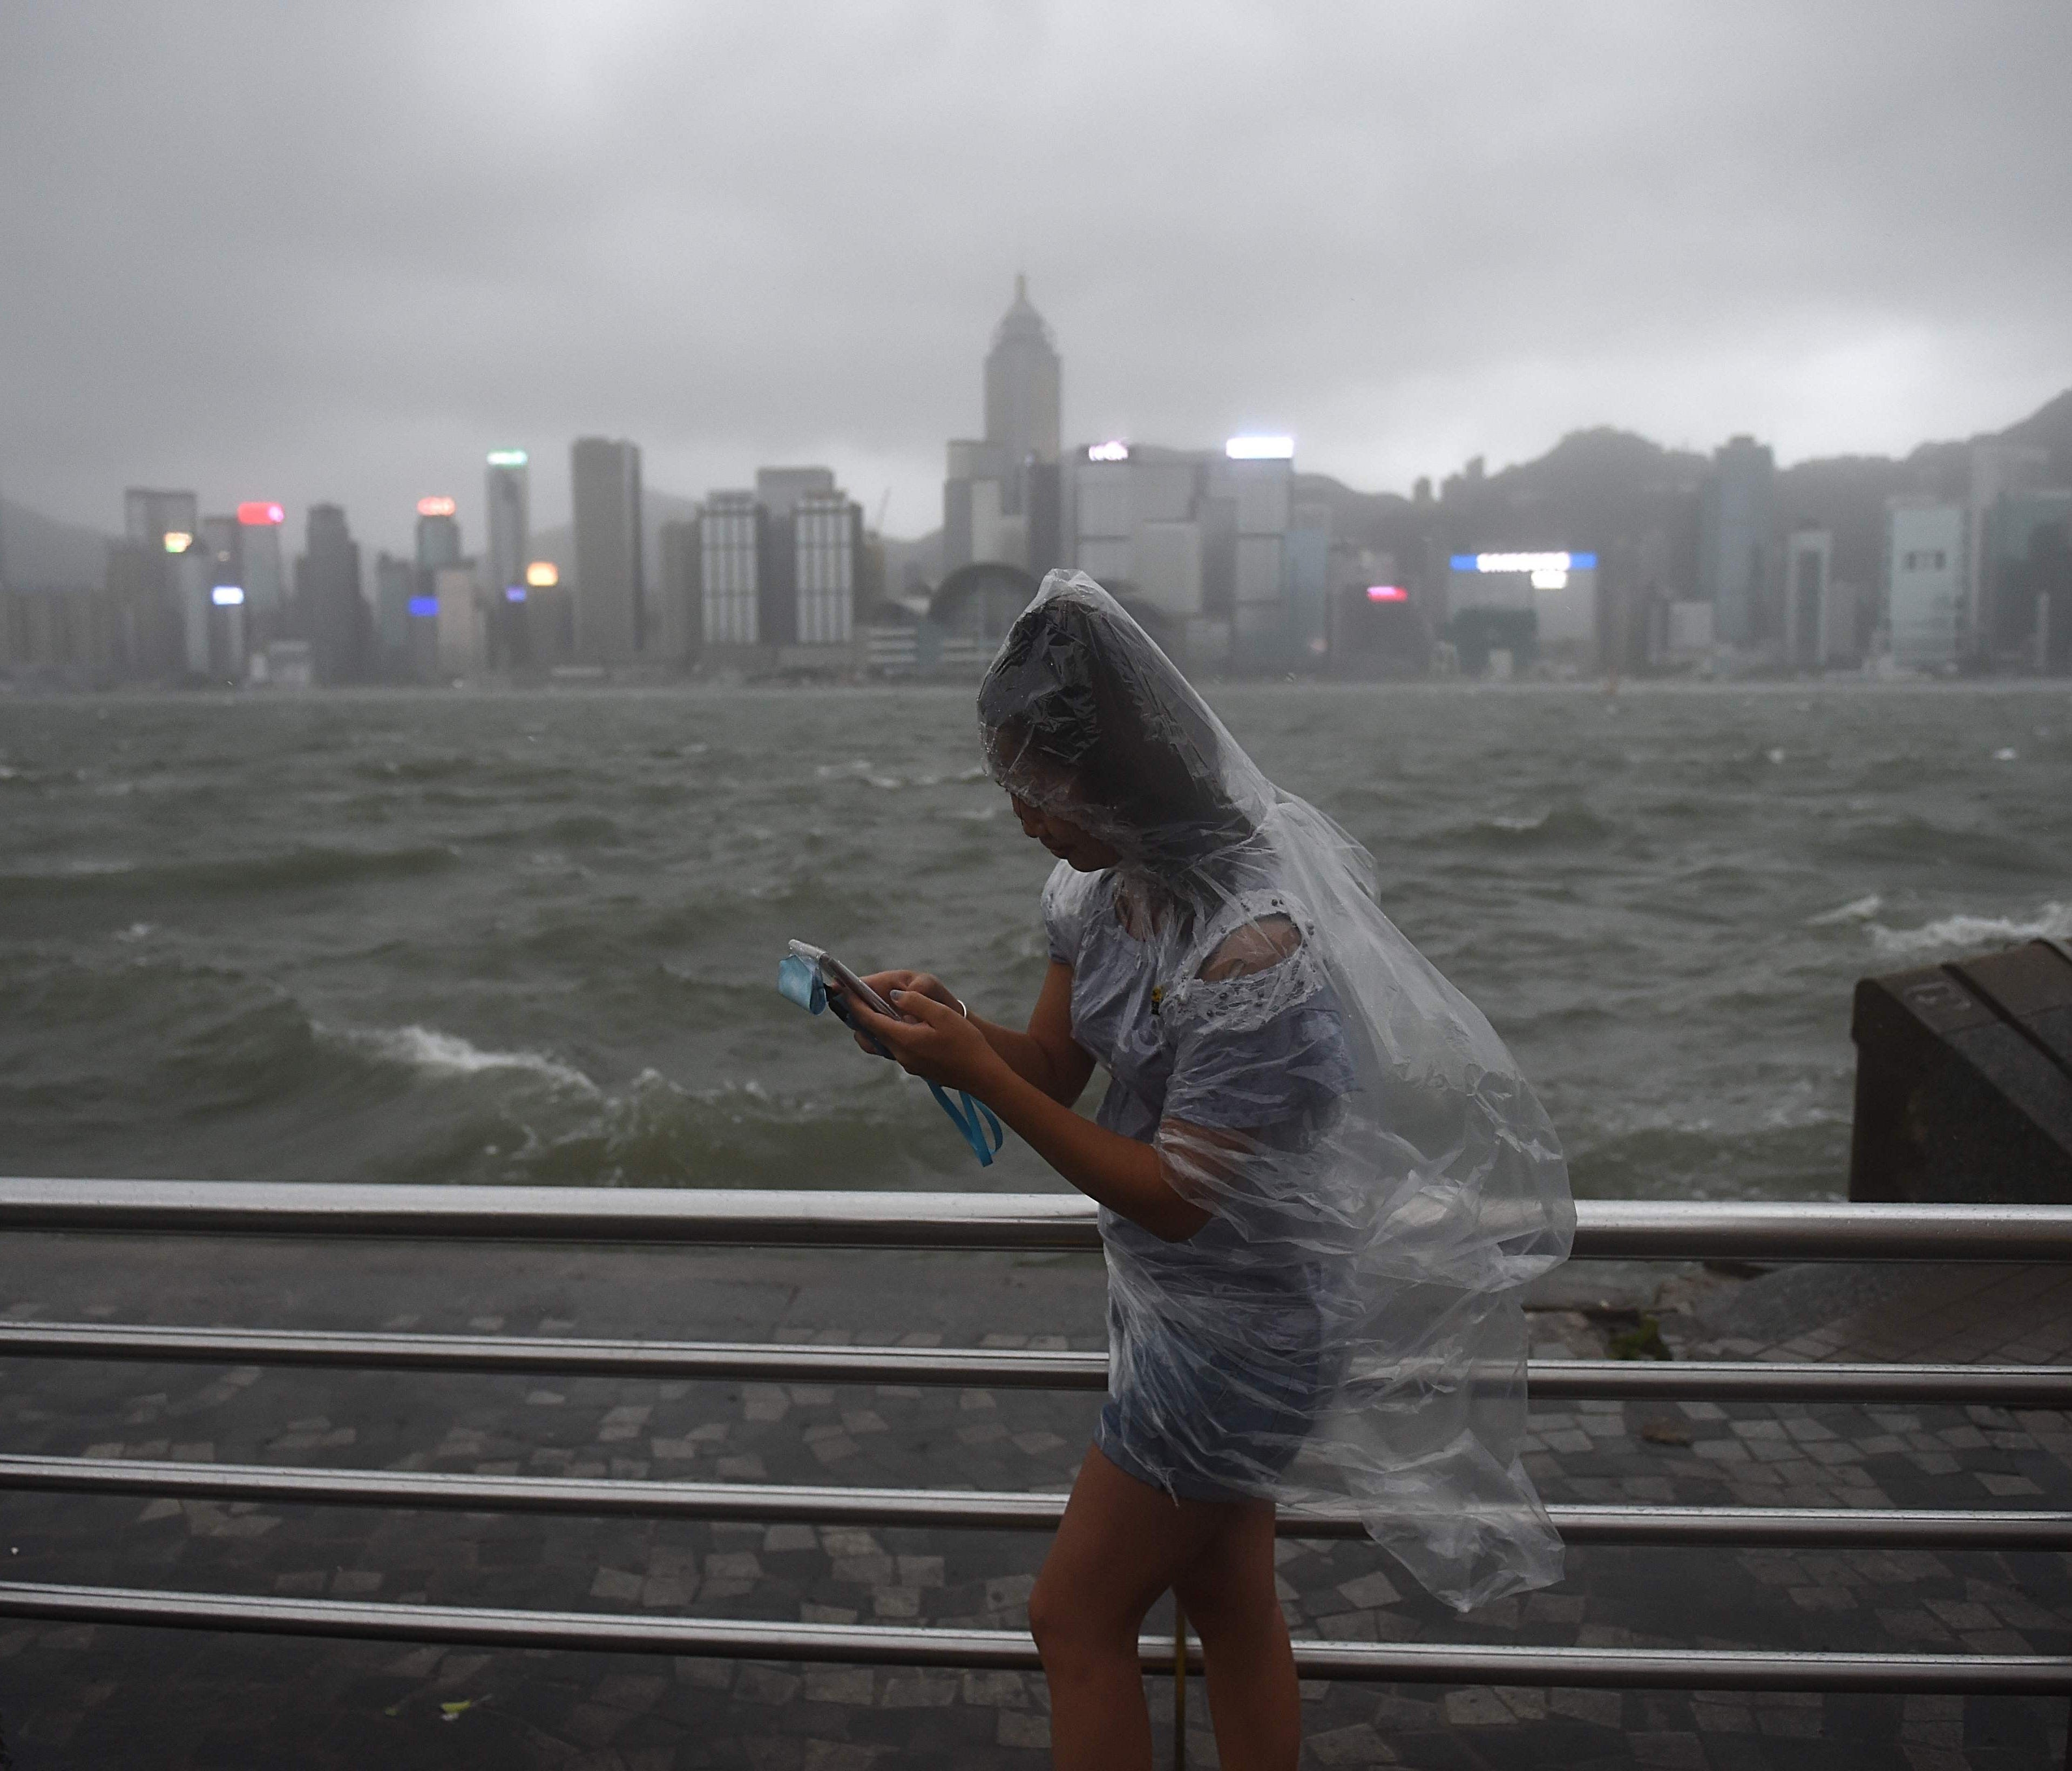 A woman uses her phone while wearing a plastic poncho along Victoria Harbour during heavy winds and rain brought on by Typhoon Hato in Hong Kong on Aug. 23, 2017.  Typhoon Hato smashed into Hong Kong on Aug. 23 with hurricane force winds and heavy rai